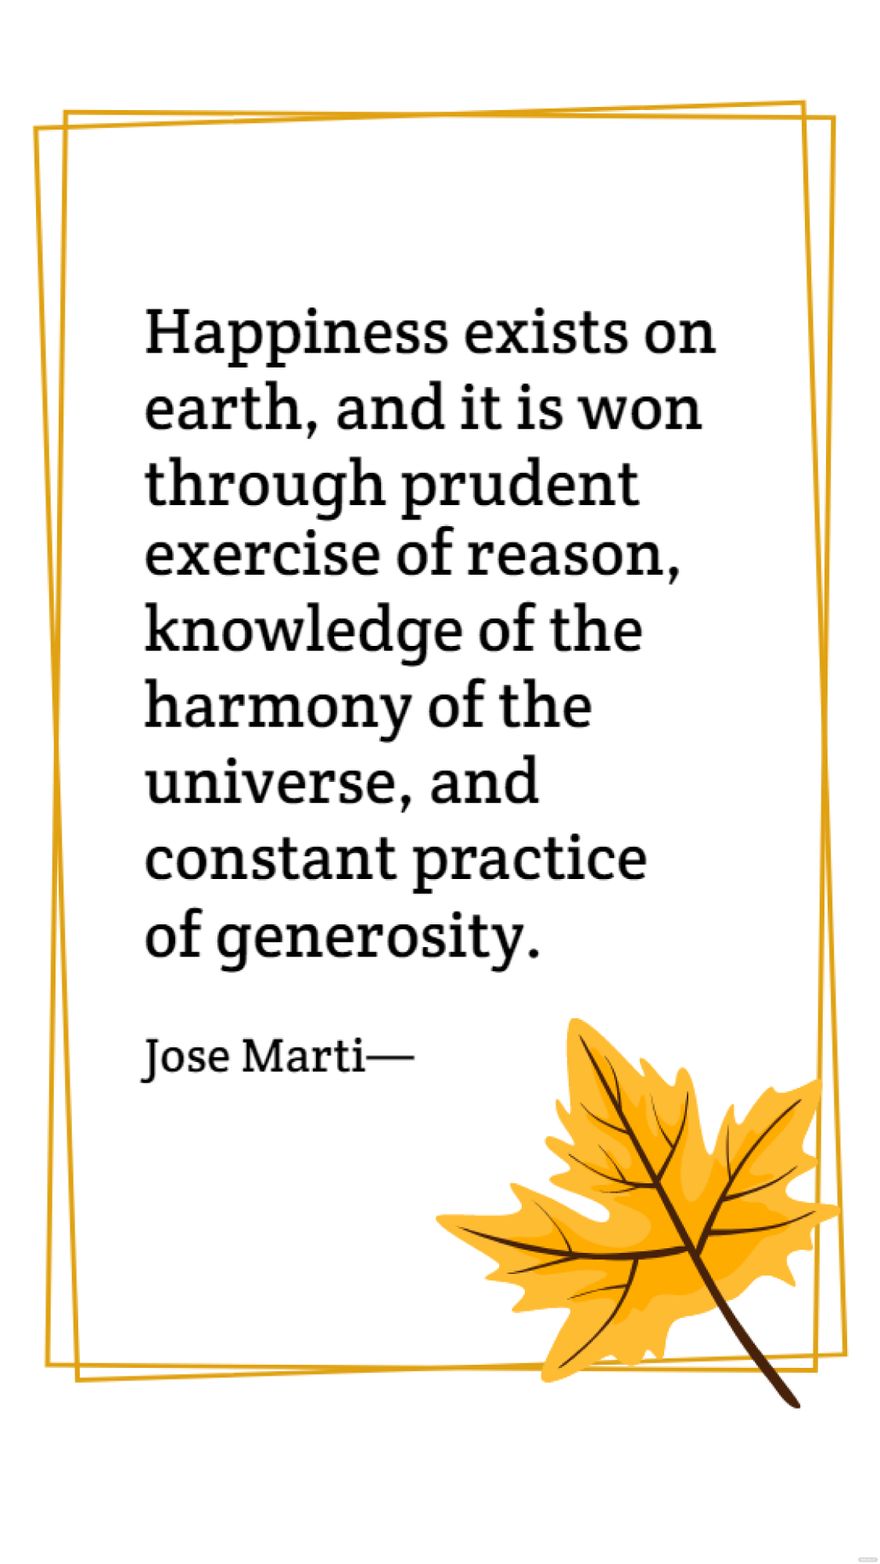 Jose Marti - Happiness exists on earth, and it is won through prudent exercise of reason, knowledge of the harmony of the universe, and constant practice of generosity.